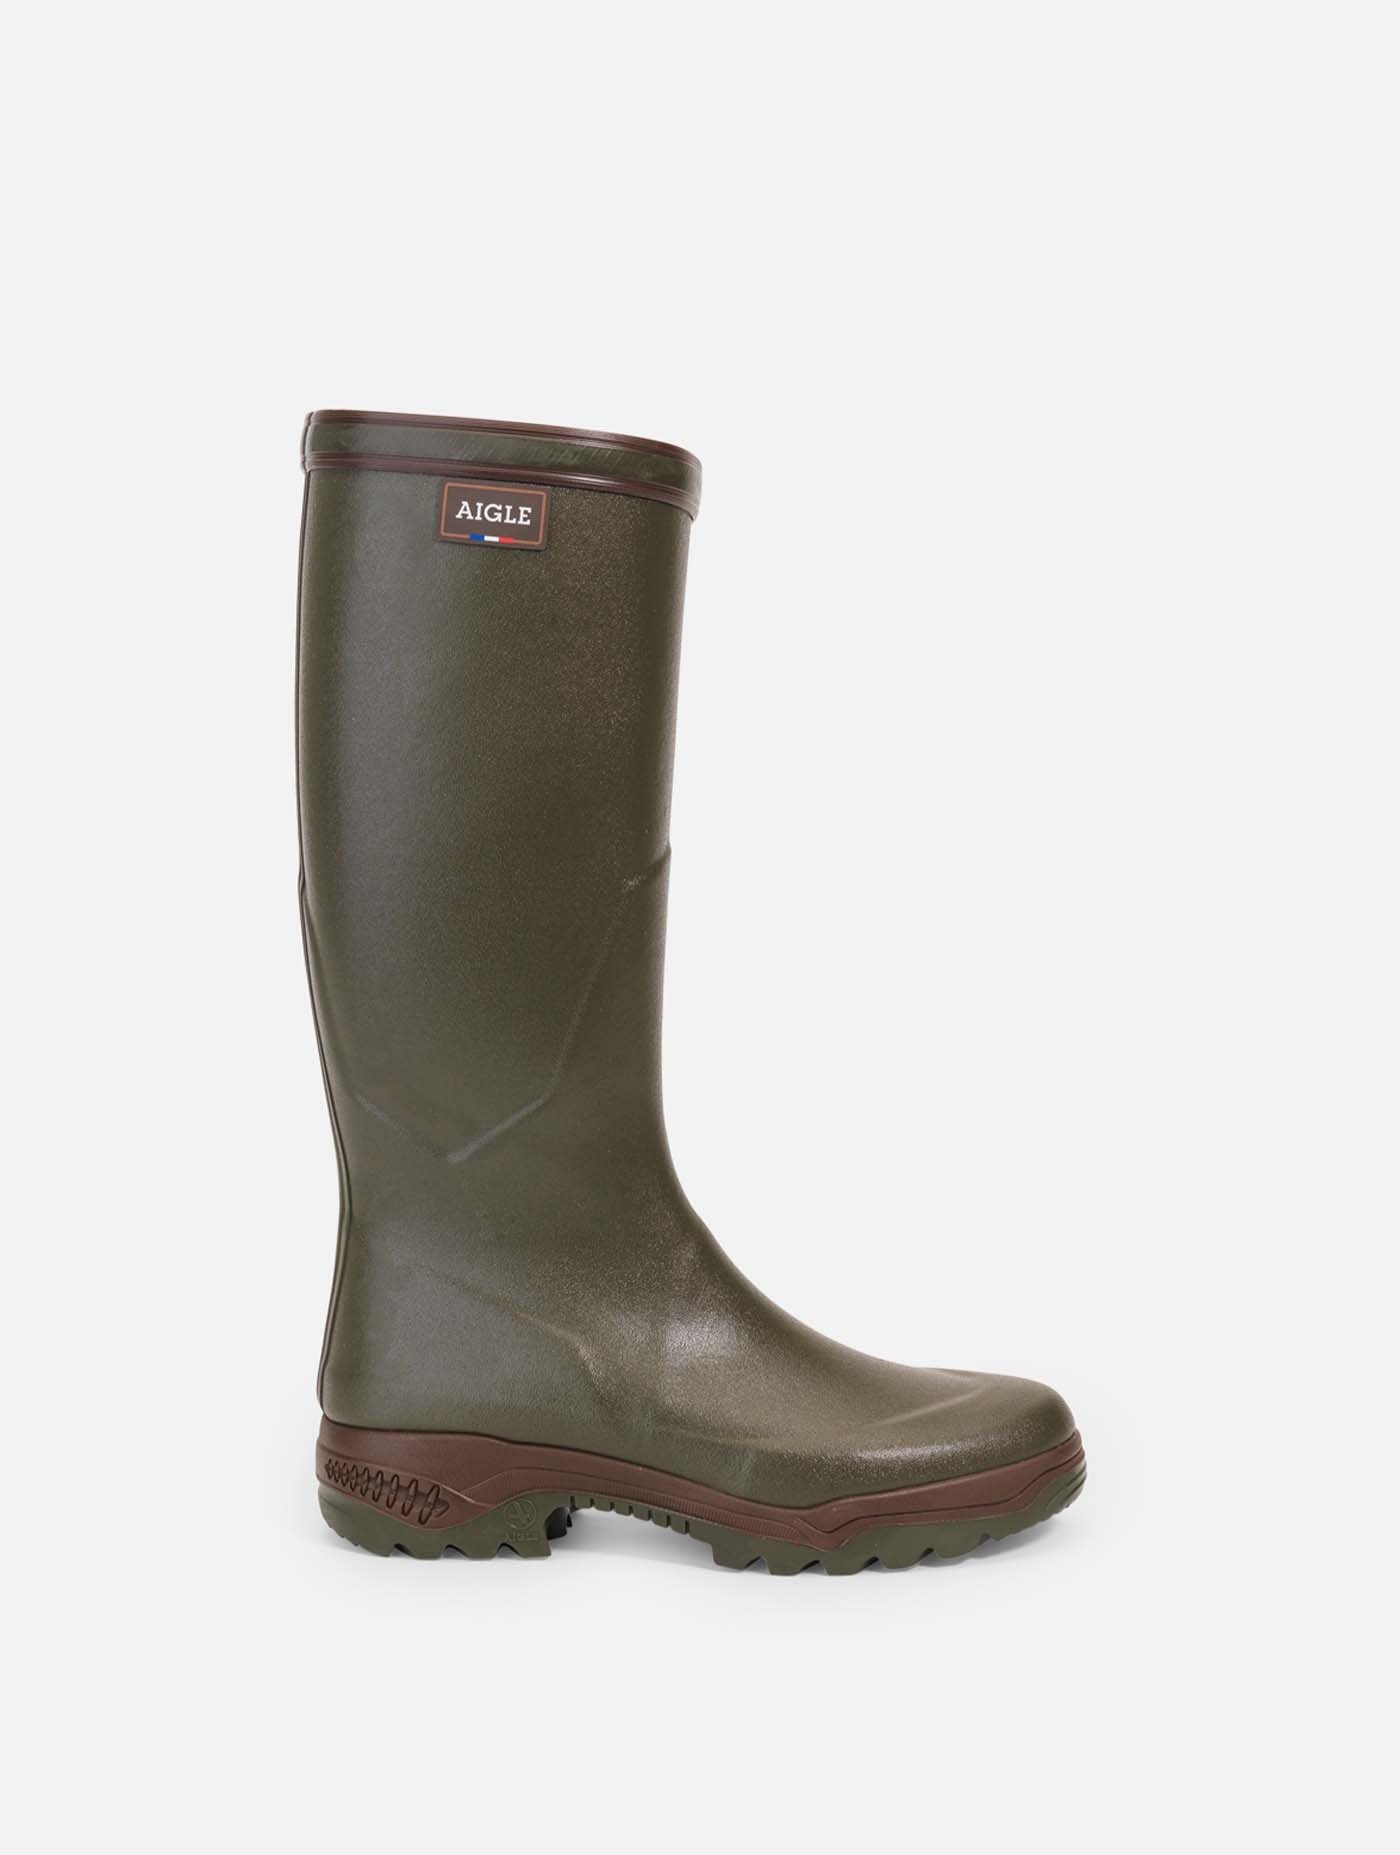 Aigle Parcours 2 Anti-Fatigue Hunting Boots - Country Clothing